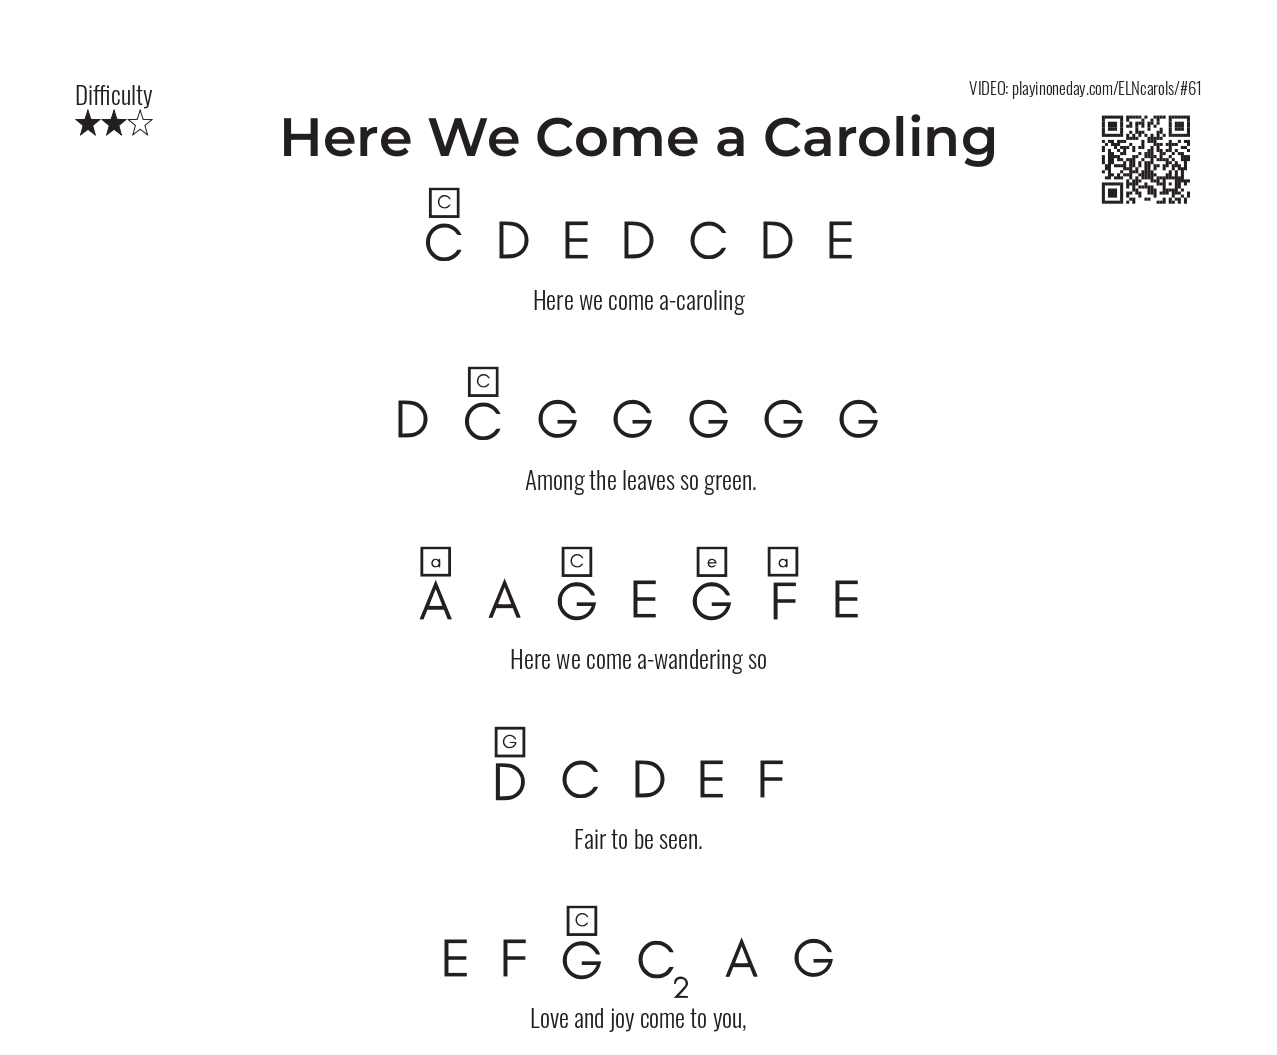 Here We Come a Caroling letter notes simple